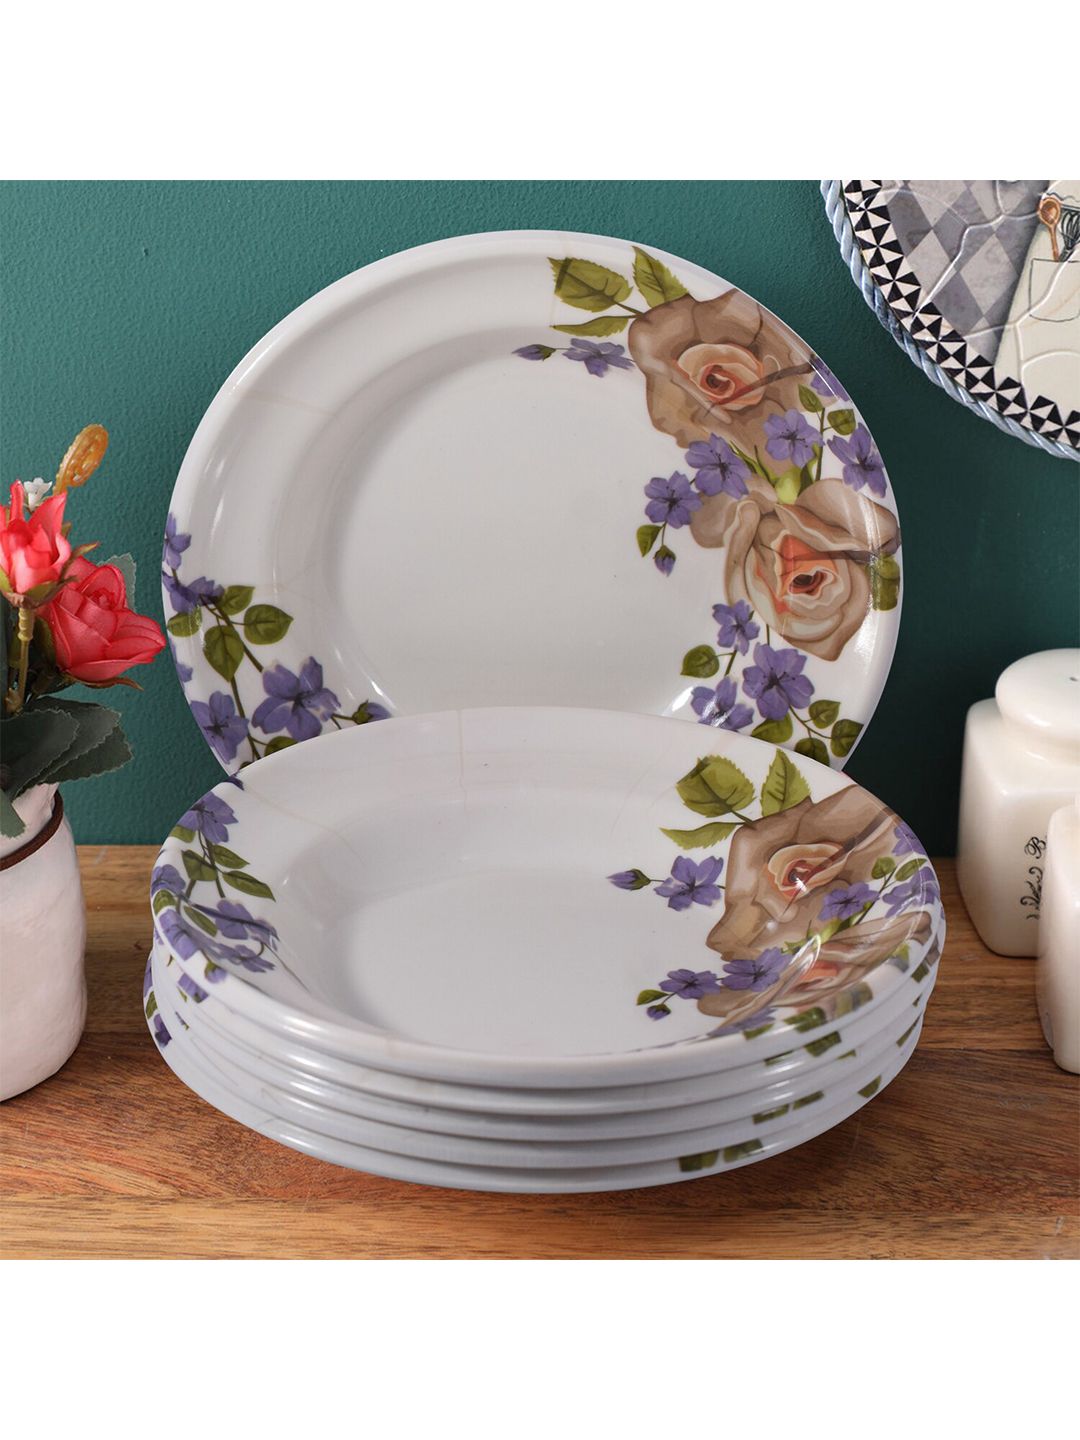 Gallery99 White & Purple 6 Pc Floral Printed Melamine Glossy Plates Set Price in India